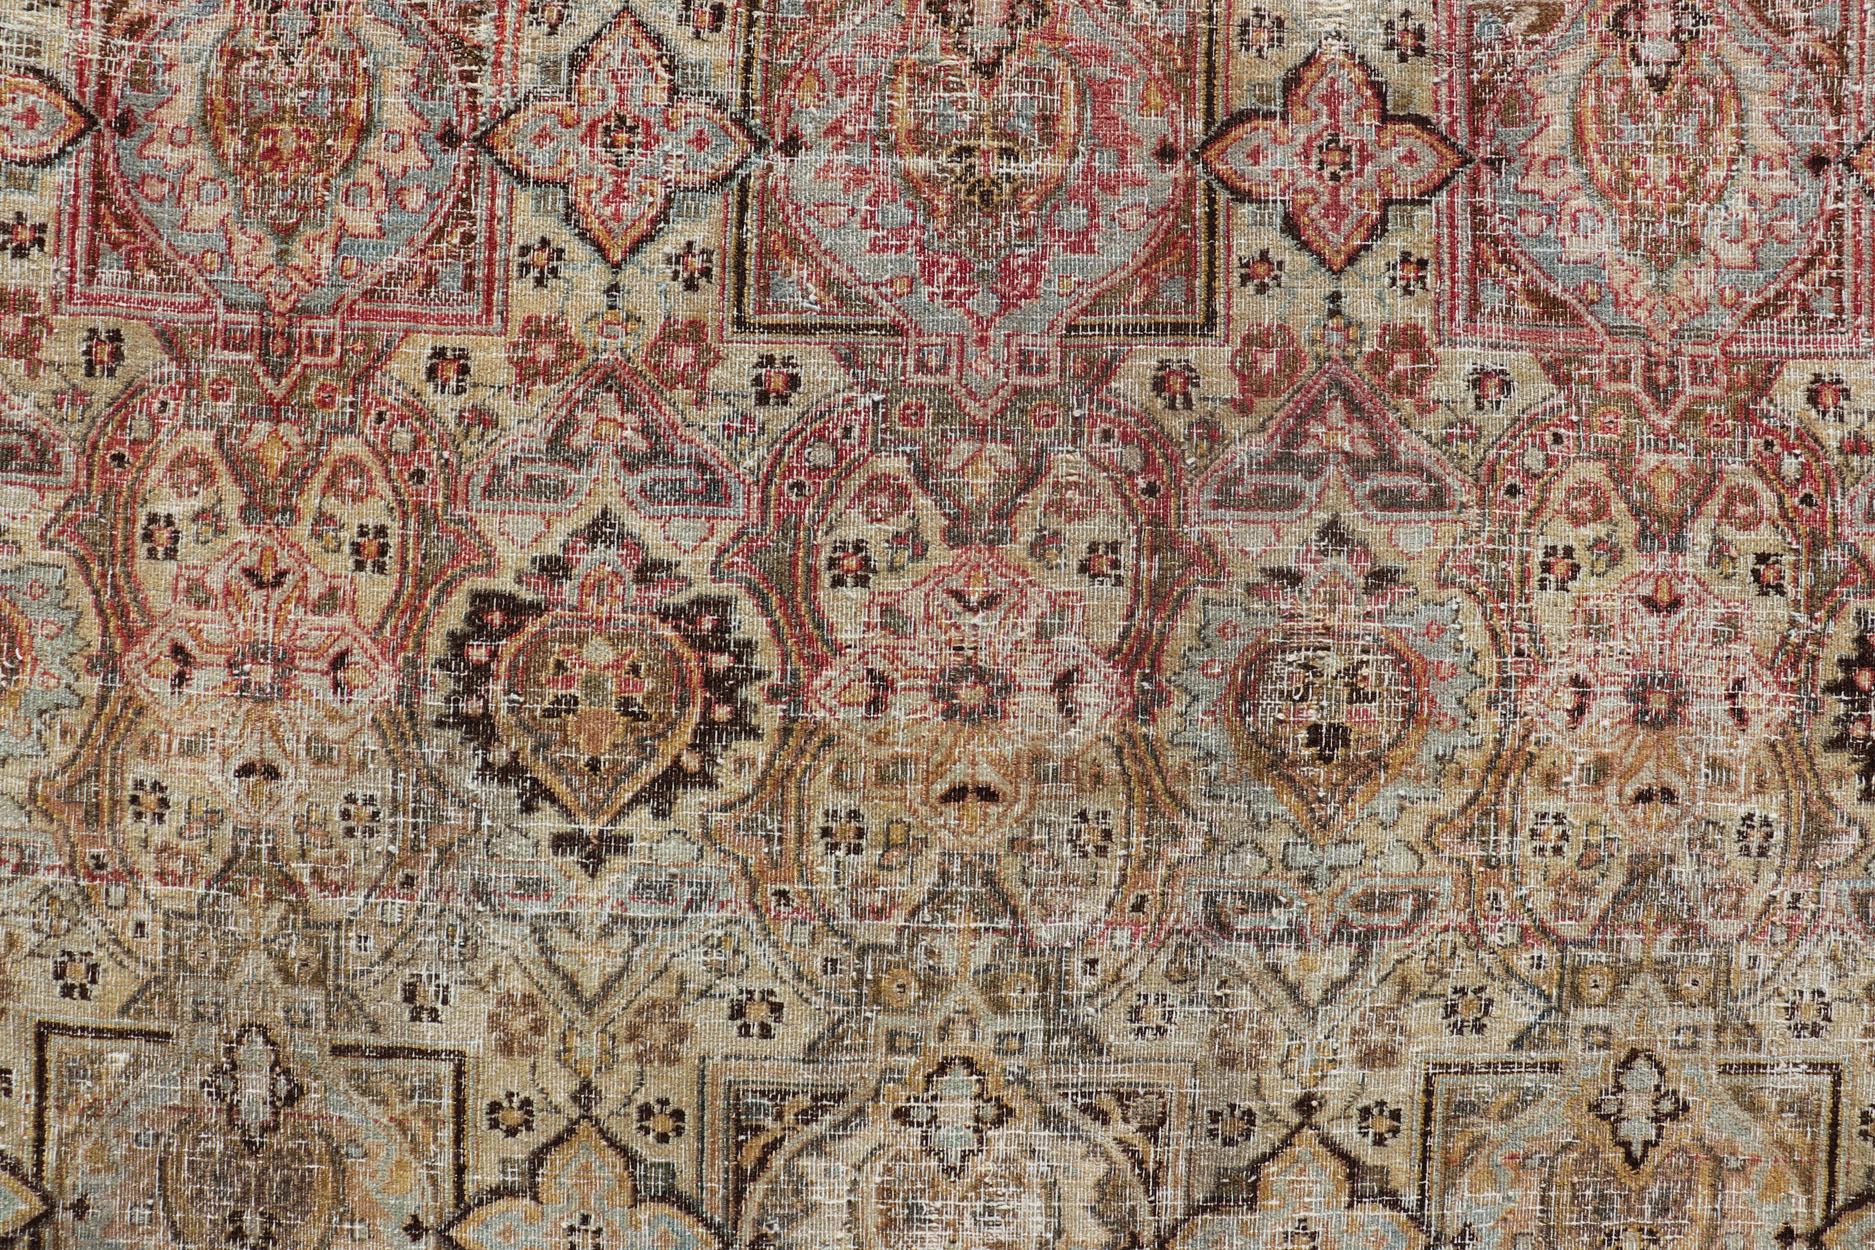  Antique Persian Khorassan Rug with Palmettes, Geometric Flowers in Soft Tones For Sale 4